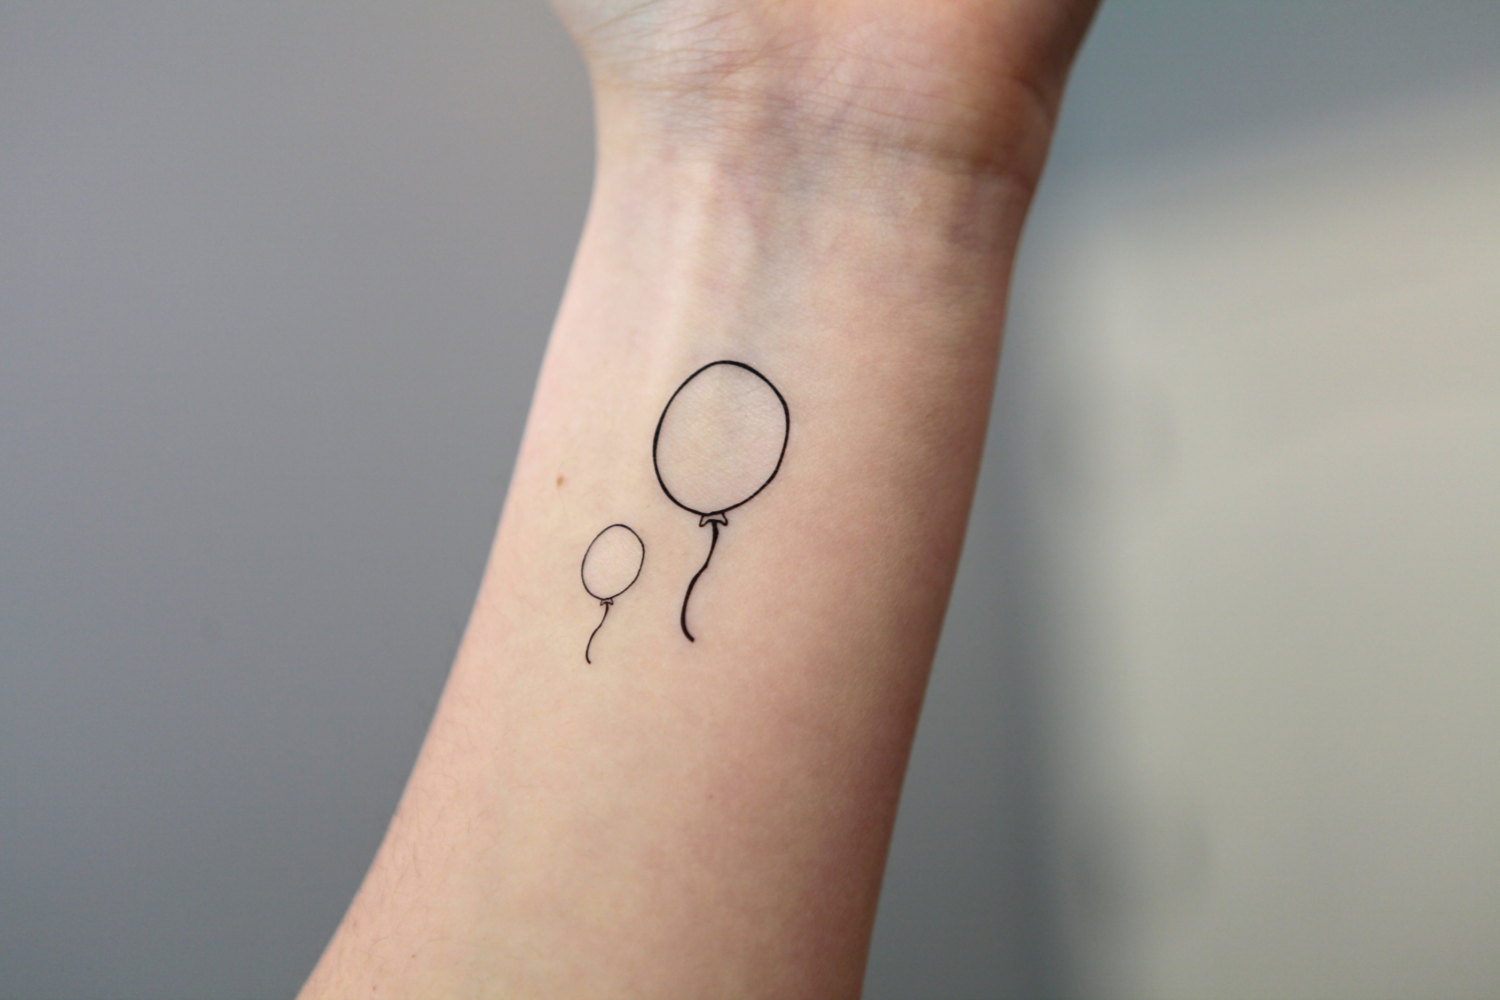 Black Outline Two Balloons Tattoo On Left Wrist